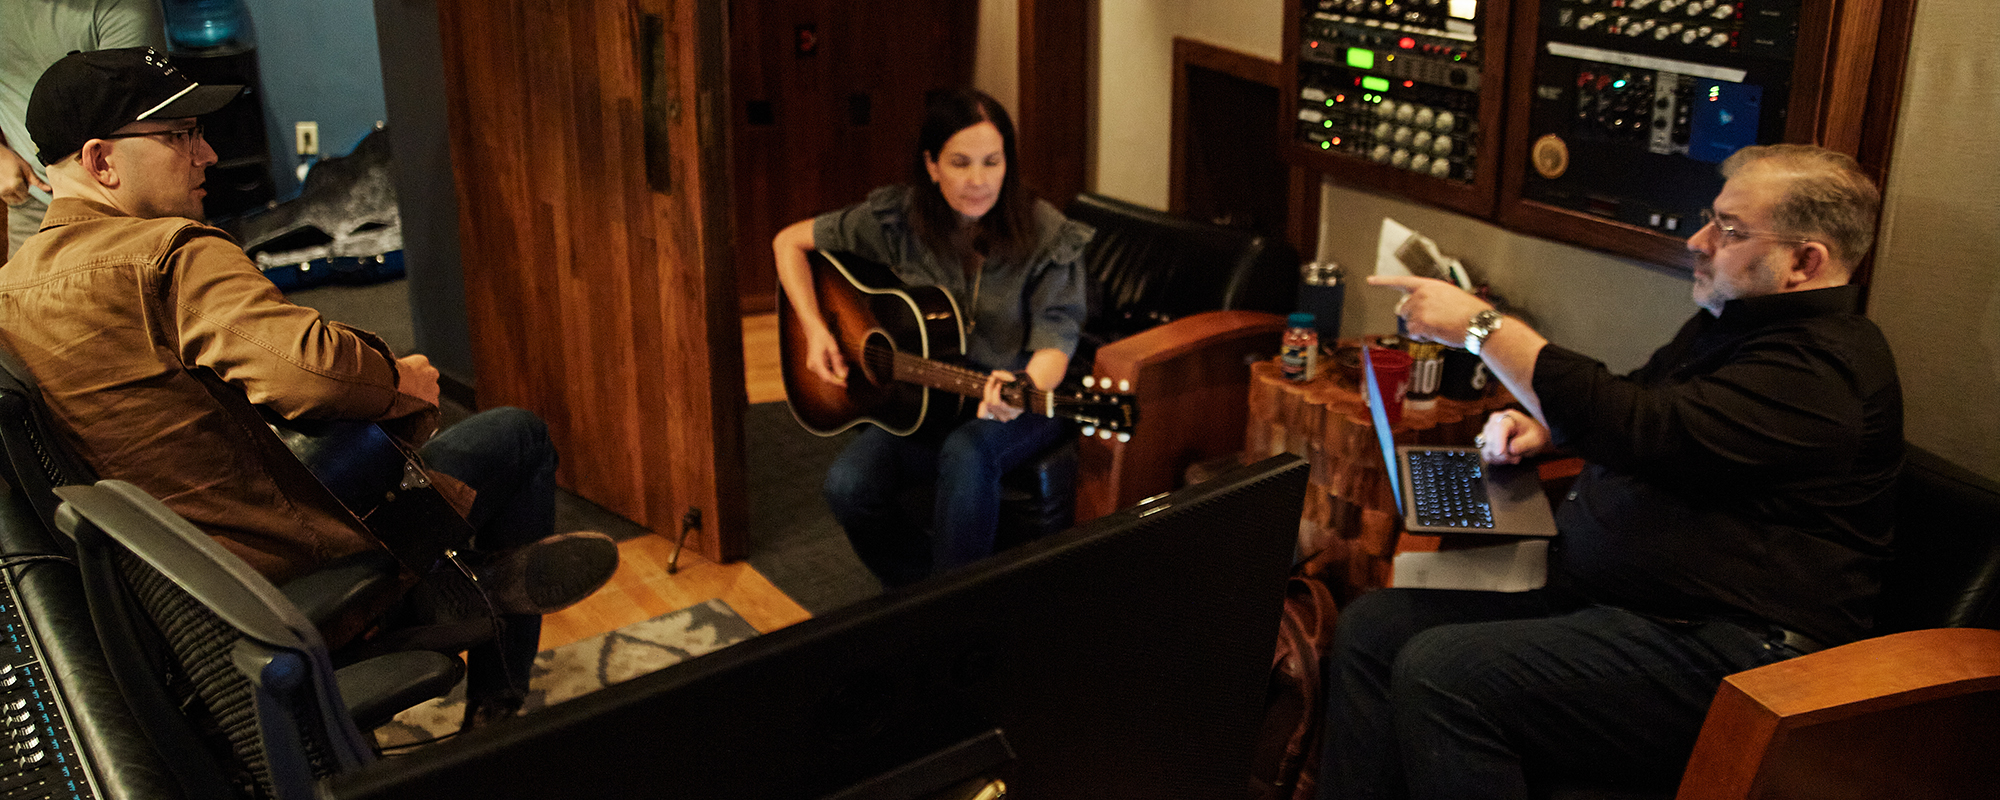 Barry Dean, Lori McKenna and Luke Laird Announce ‘The Songwriter Tapes Vol. 3’